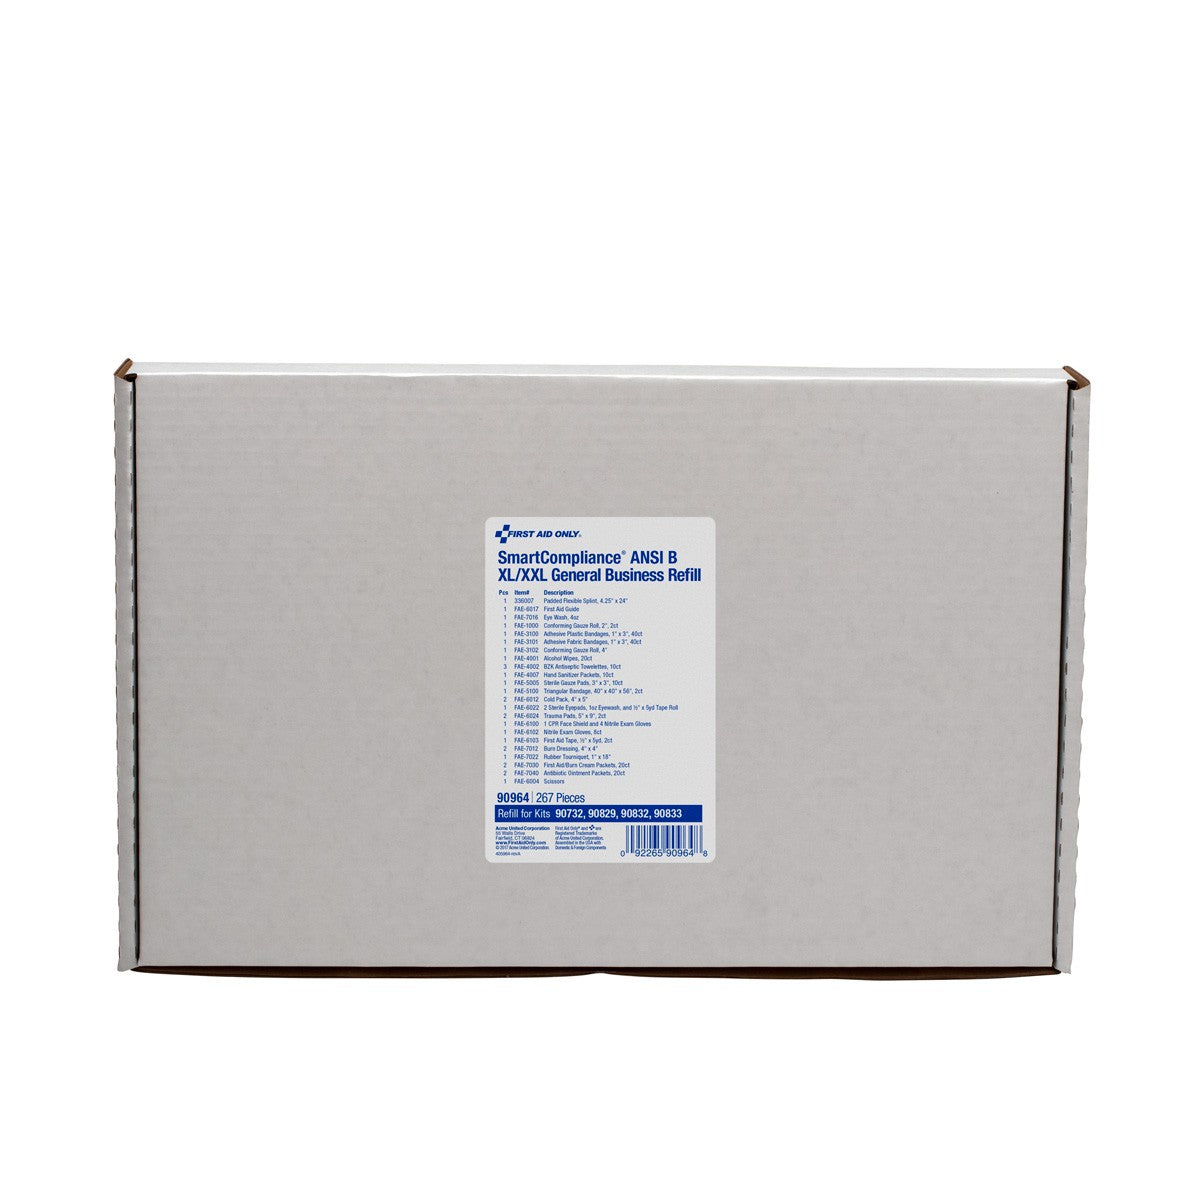 SmartCompliance ANSI B General Business Refill - W-90964